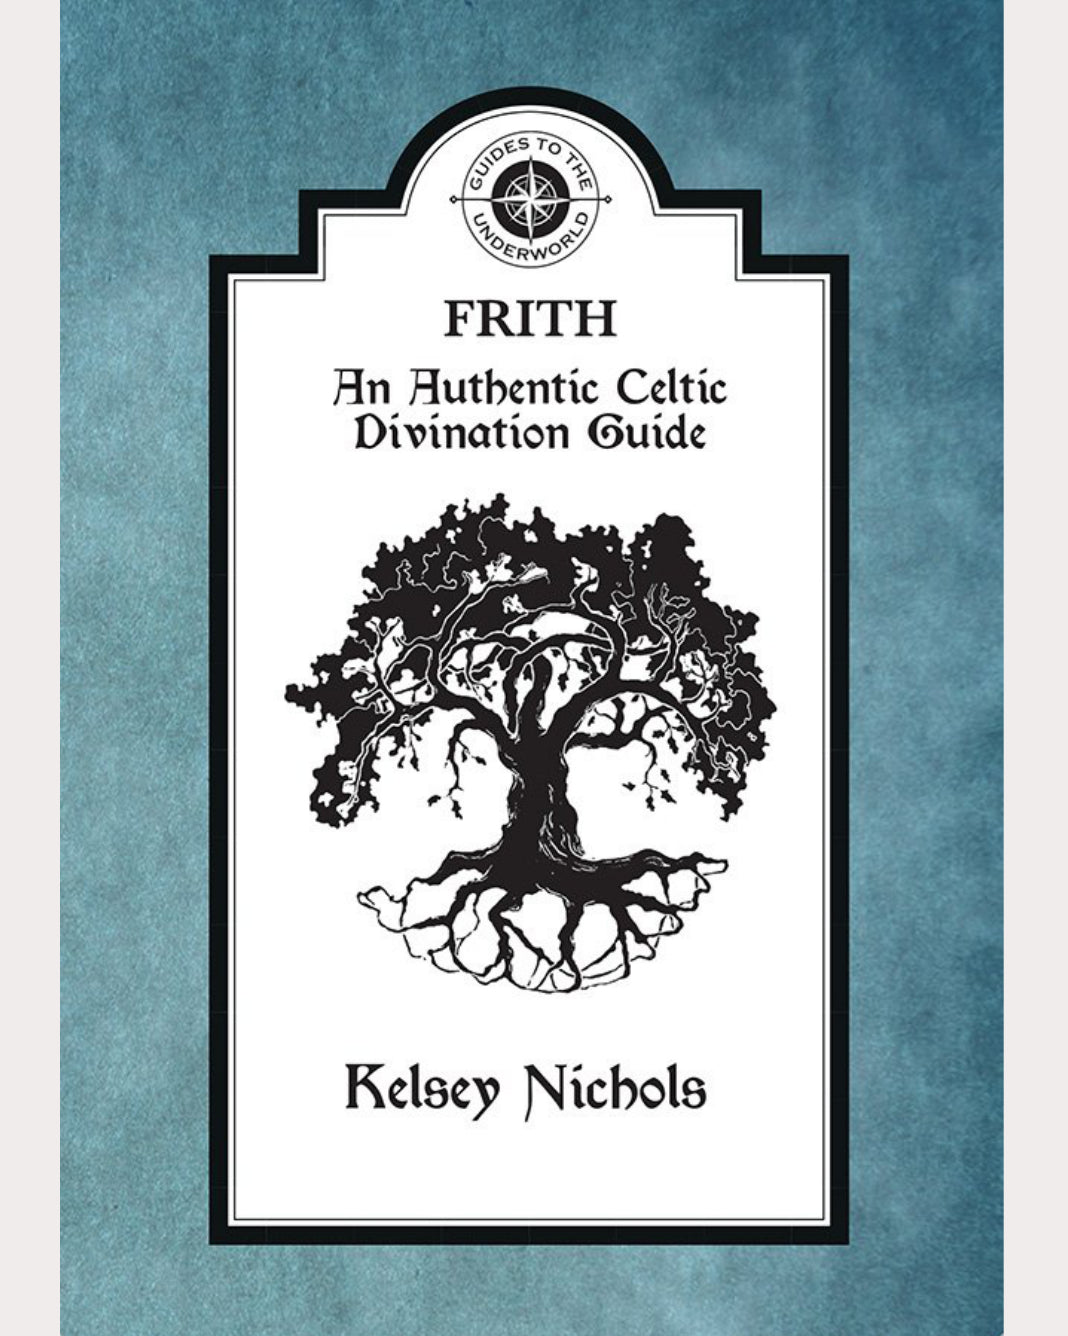 Frith: An Authentic Celtic Divination Guide